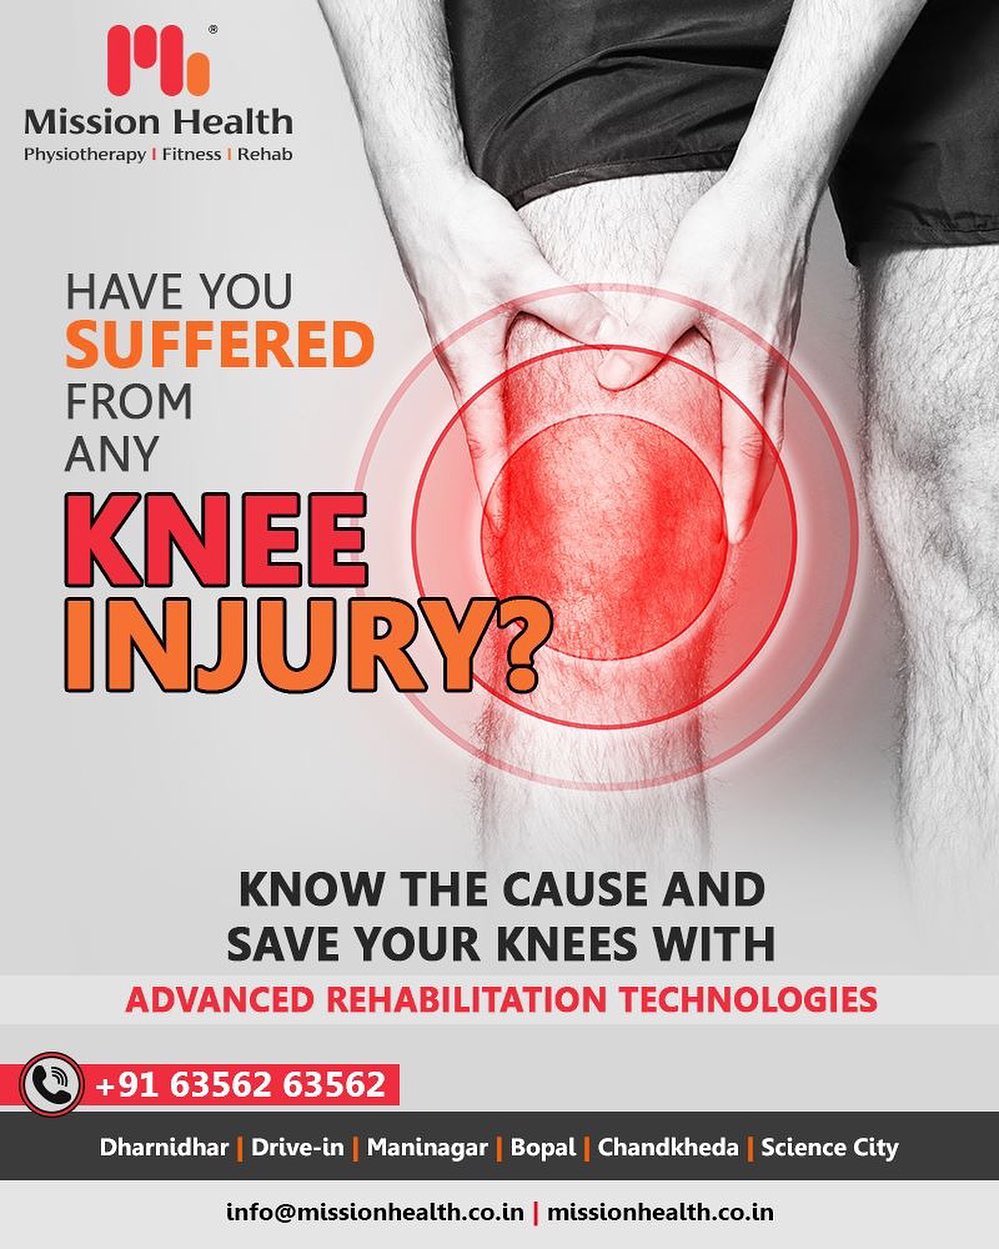 Right from the clinical and objective assessment of Knee Joint and establishing the accurate diagnosis (cause) of Knee pain, we provide a 360-degree approach for Knee Pain treatment with the most advanced technologies and rehab programs. Treatment protocols are targeted to pain and inflammation reduction with advanced non –surgical pain relief technologies. Clubbed with Strength and Endurance Conditioning, Proprioceptive Rehab, Biomechanical Corrections, Footwear Modifications, Ergonomics and Home Exercise Program, patients achieve the fastest and long-lasting results.

Yes, you can treat your Knee Pain and bid good bye to it forever with our holistic treatment approach!

Call: +916356263562
Visit: www.missionhealth.co.in

#kneepain #rehabilitation #prehab #sportstherapy #kneeinjury #kneerehab #chronicpain #MissionHealth #MissionHealthIndia #MovementIsLife